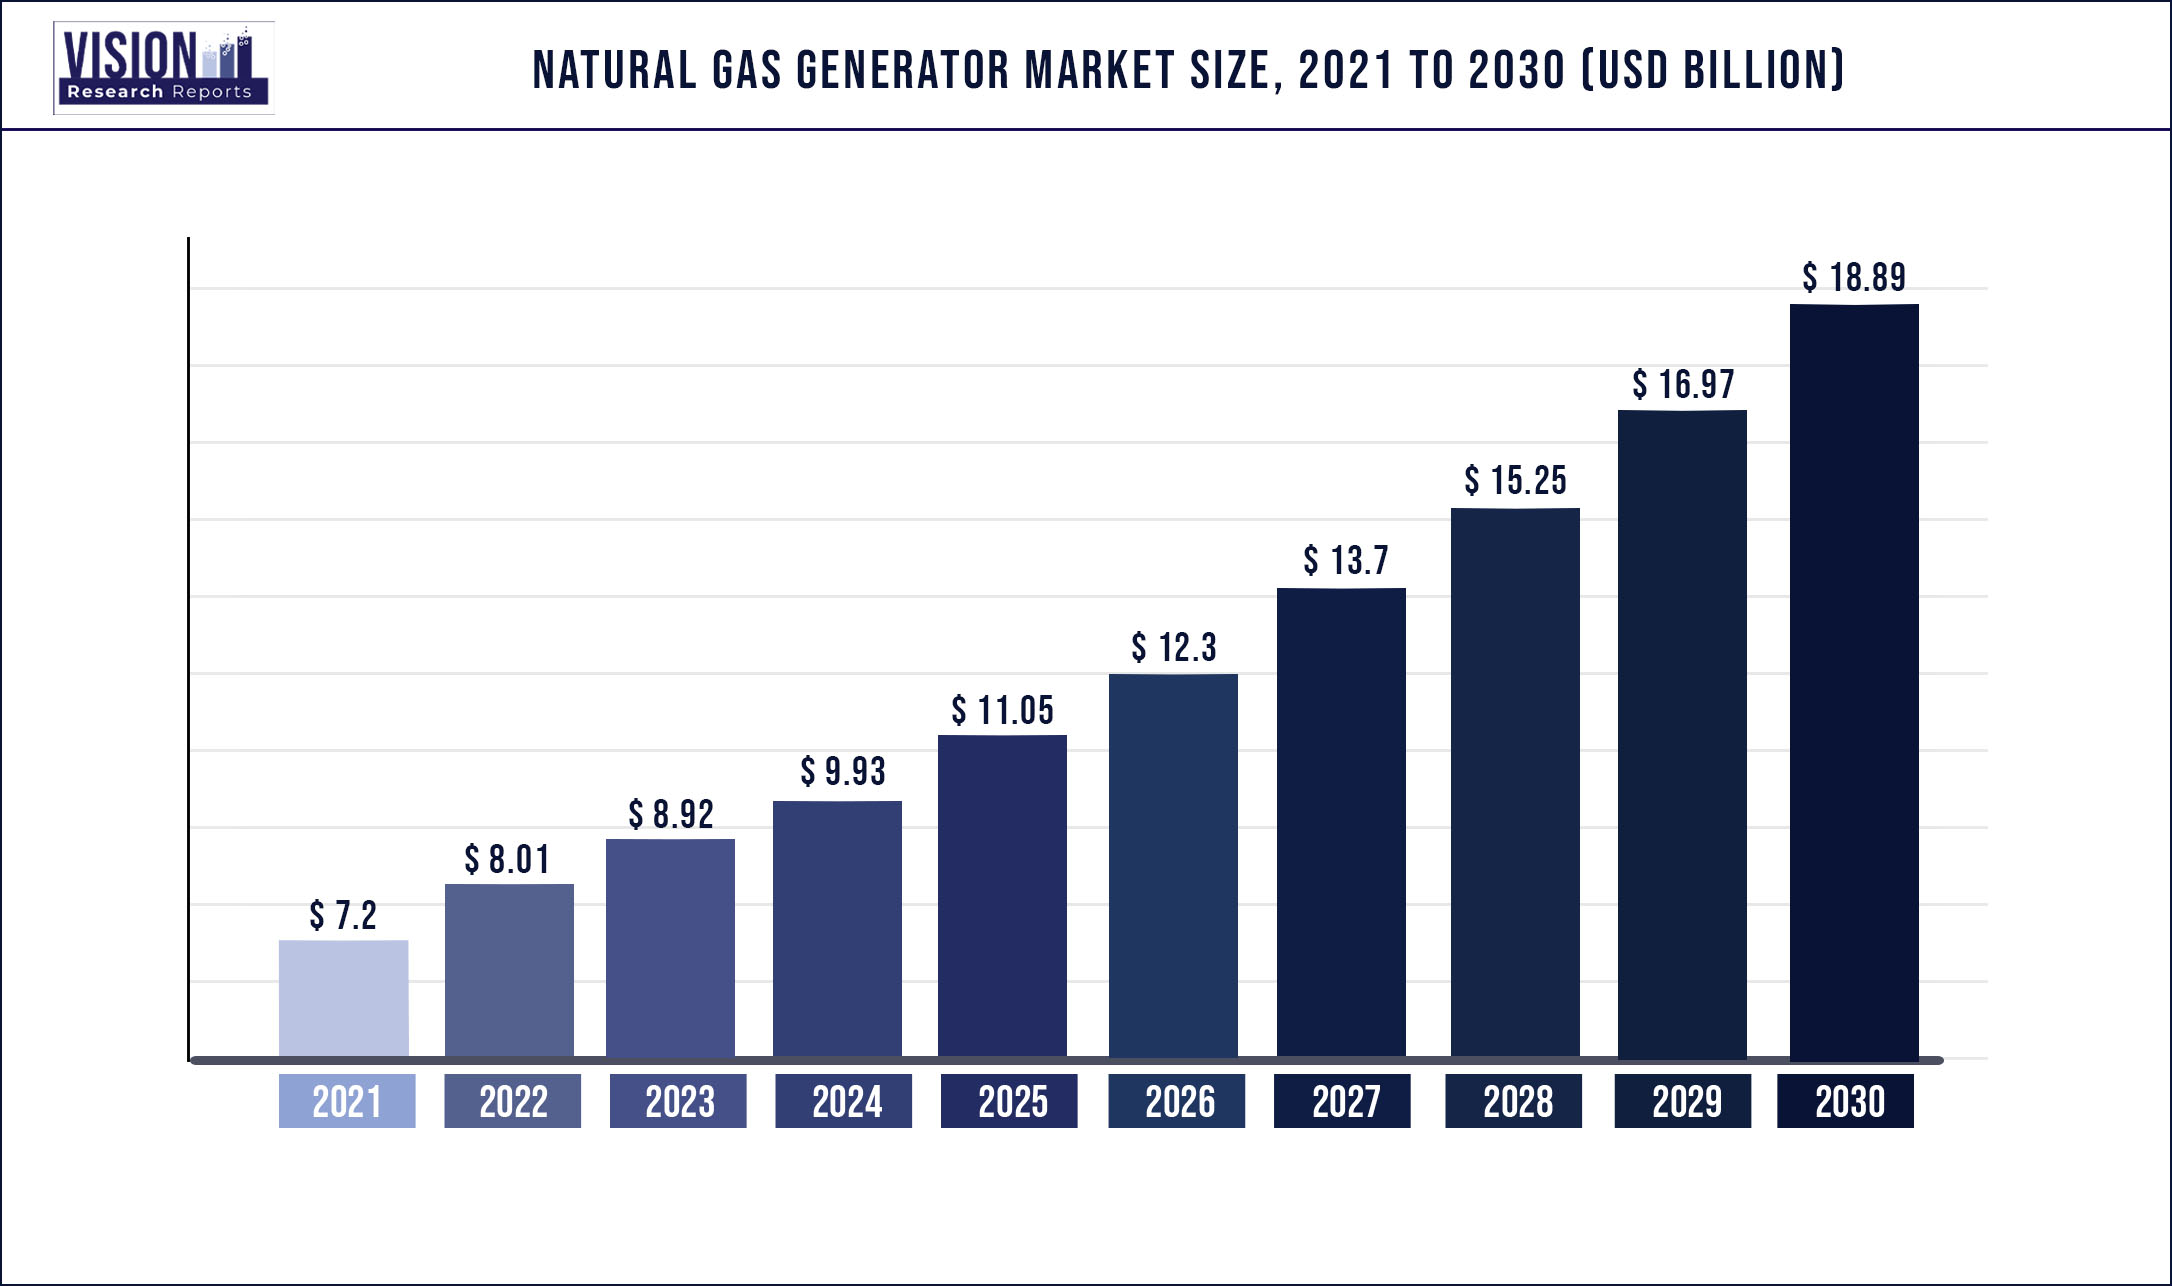 Natural Gas Generator Market Size 2021 to 2030